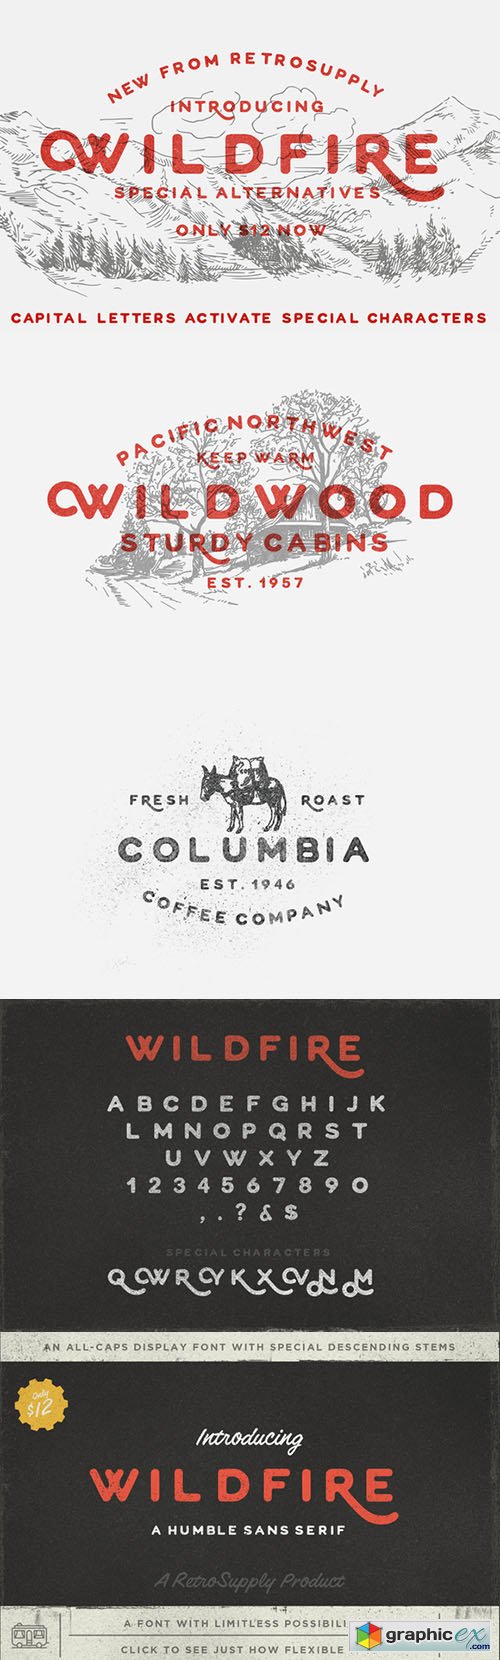 WildFire Font